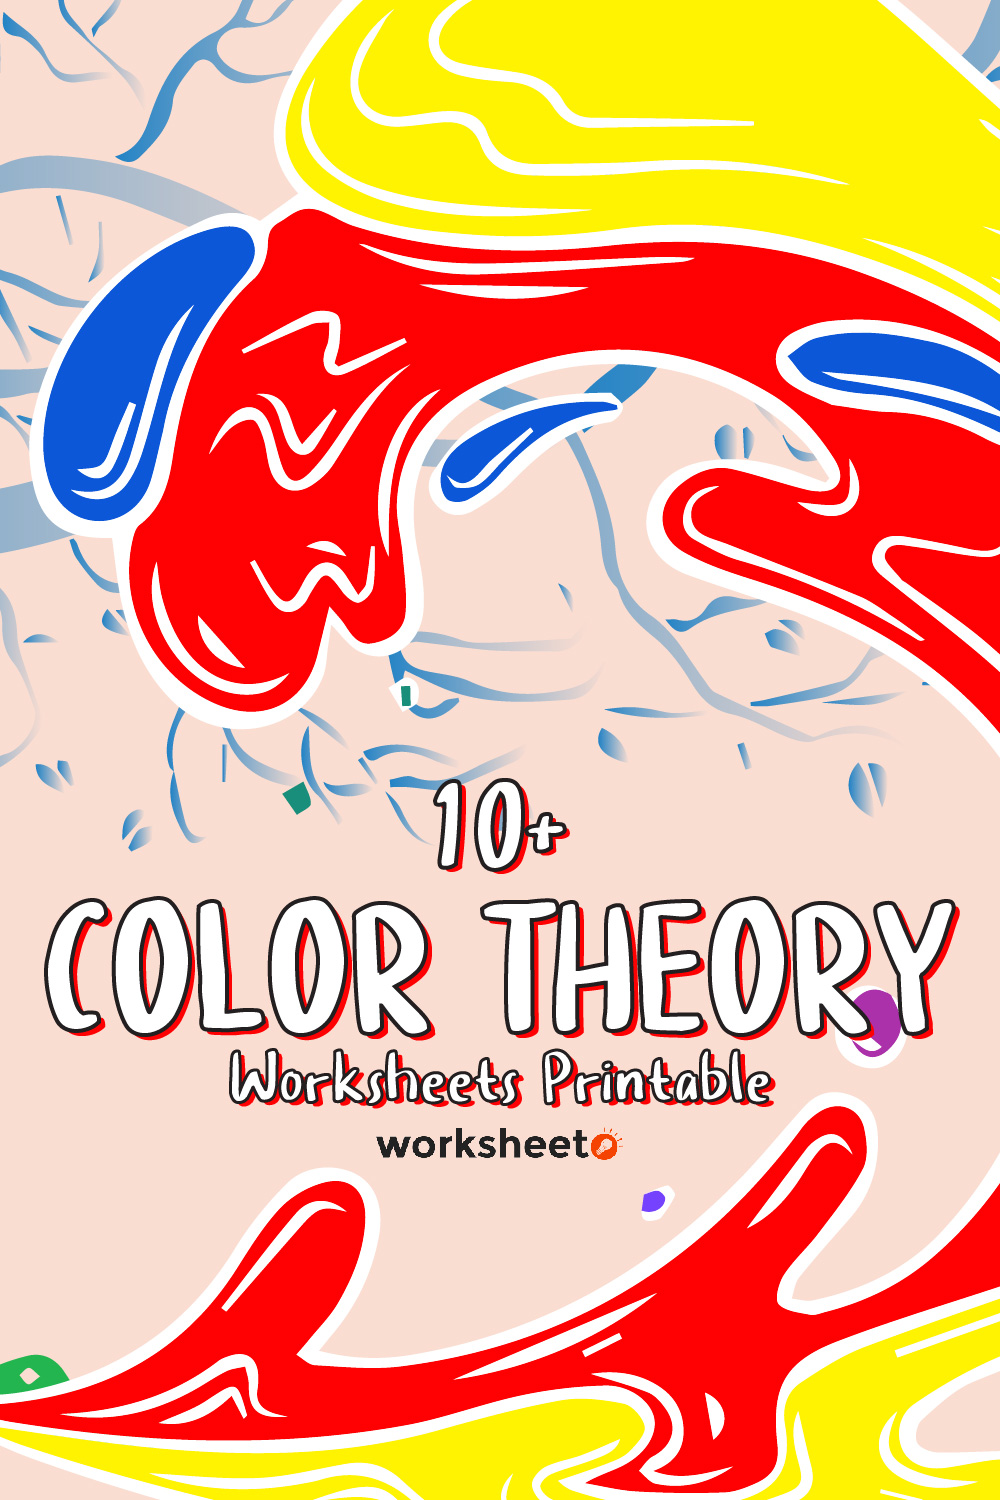 18 Images of Color Theory Worksheets Printable